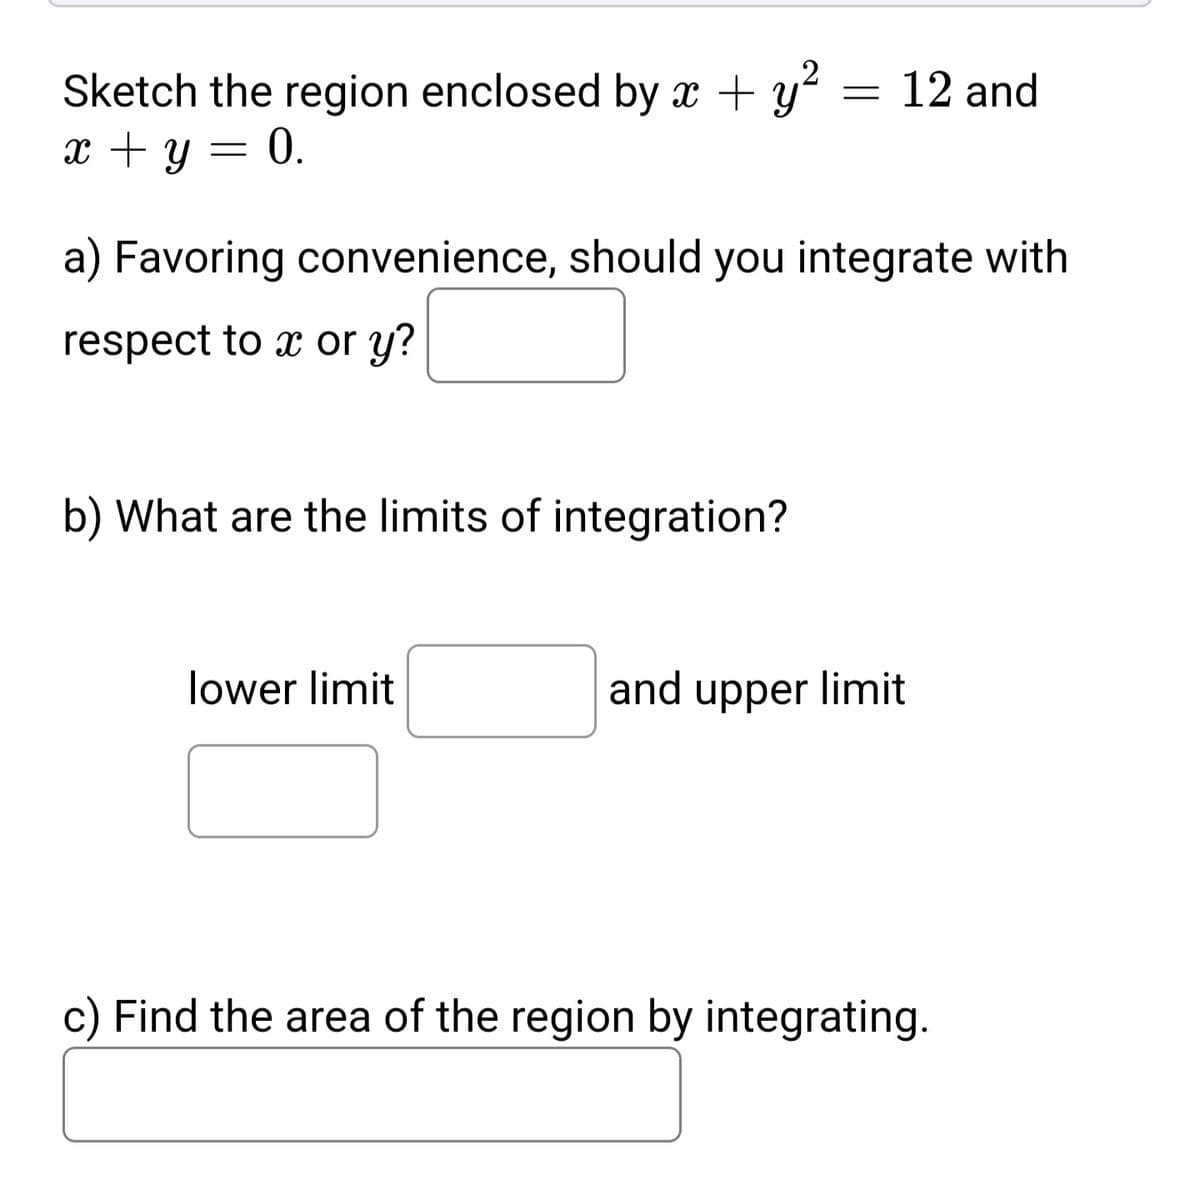 Sketch the region enclosed by x + y? = 12 and
x + y = 0.
a) Favoring convenience, should you integrate with
respect to x or y?
b) What are the limits of integration?
lower limit
and upper limit
c) Find the area of the region by integrating.
